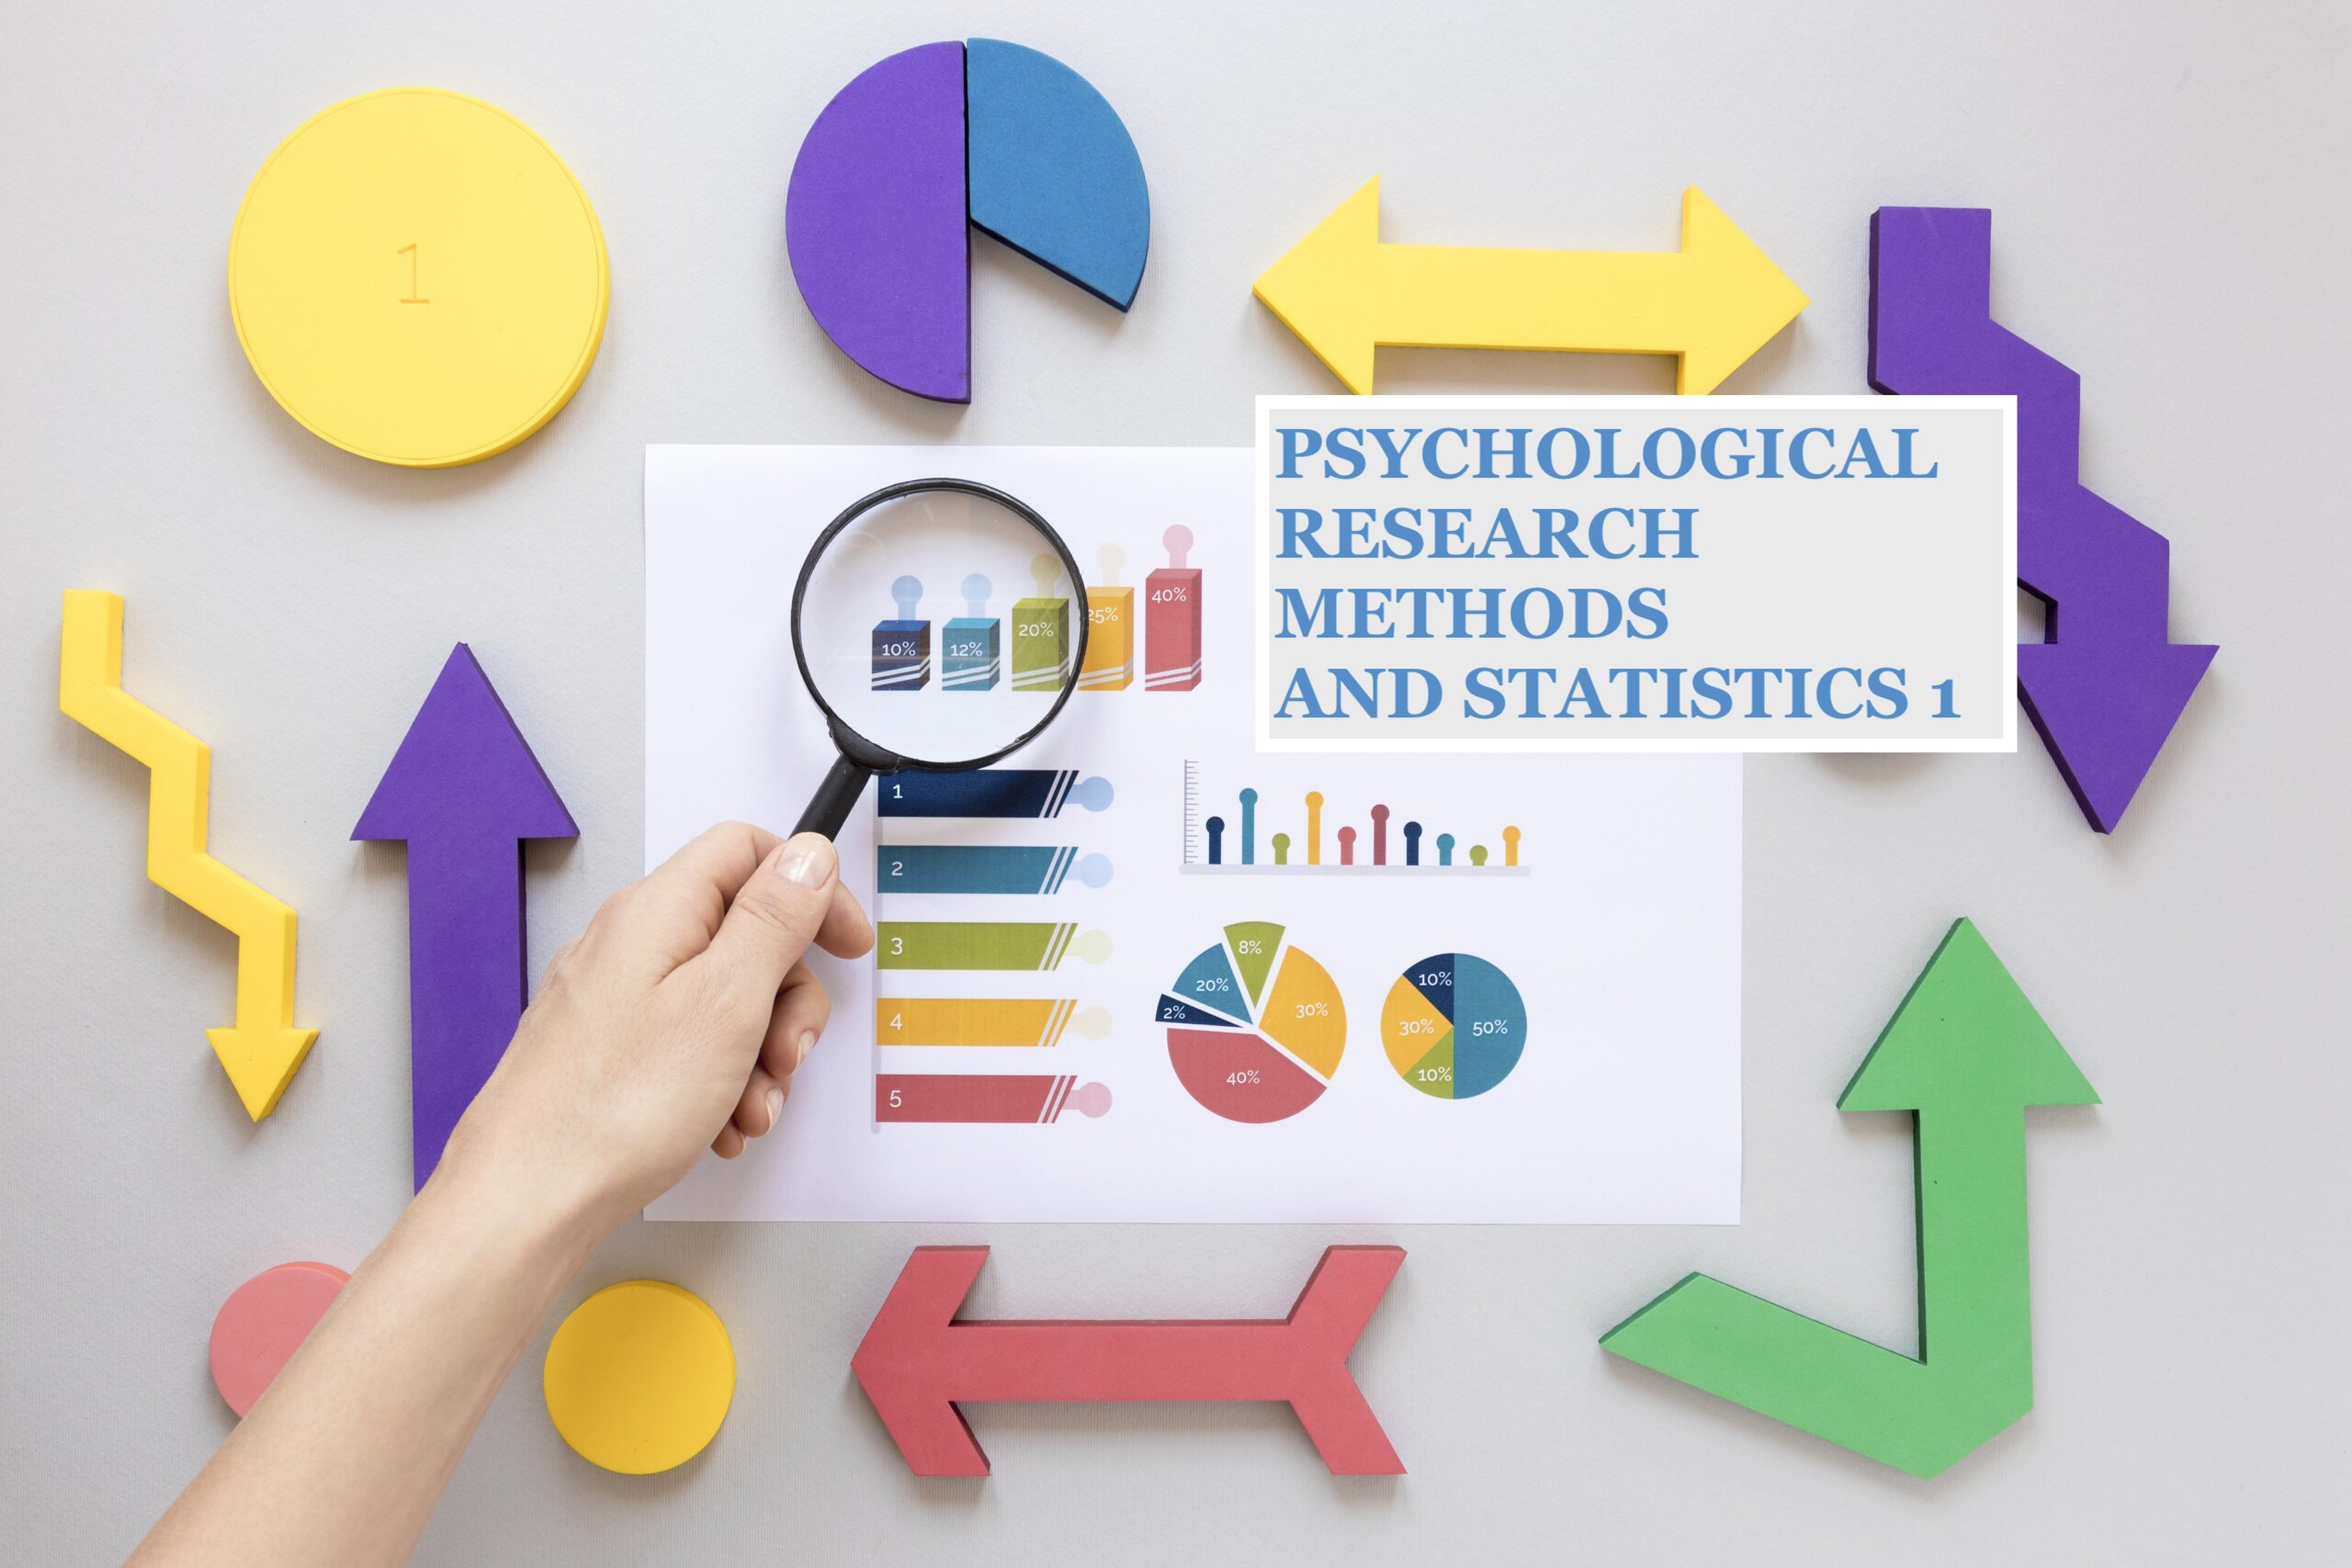 PSYCHOLOGICAL RESEARCH METHODS AND STATISTICS 1 (MCPS5021_1)